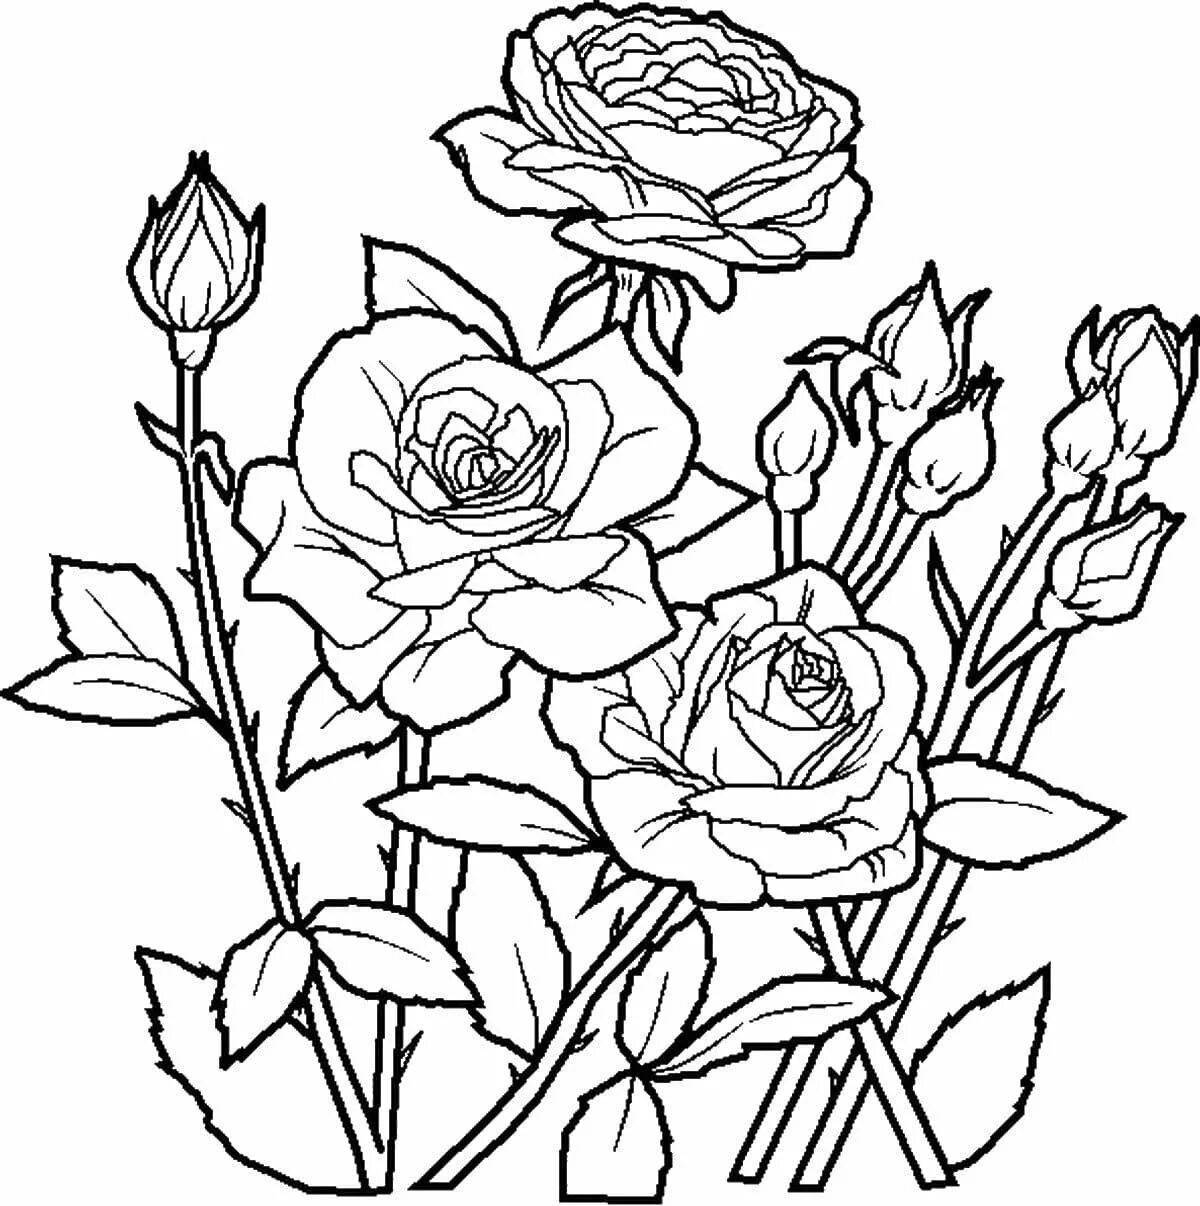 Violent coloring drawing of a rose